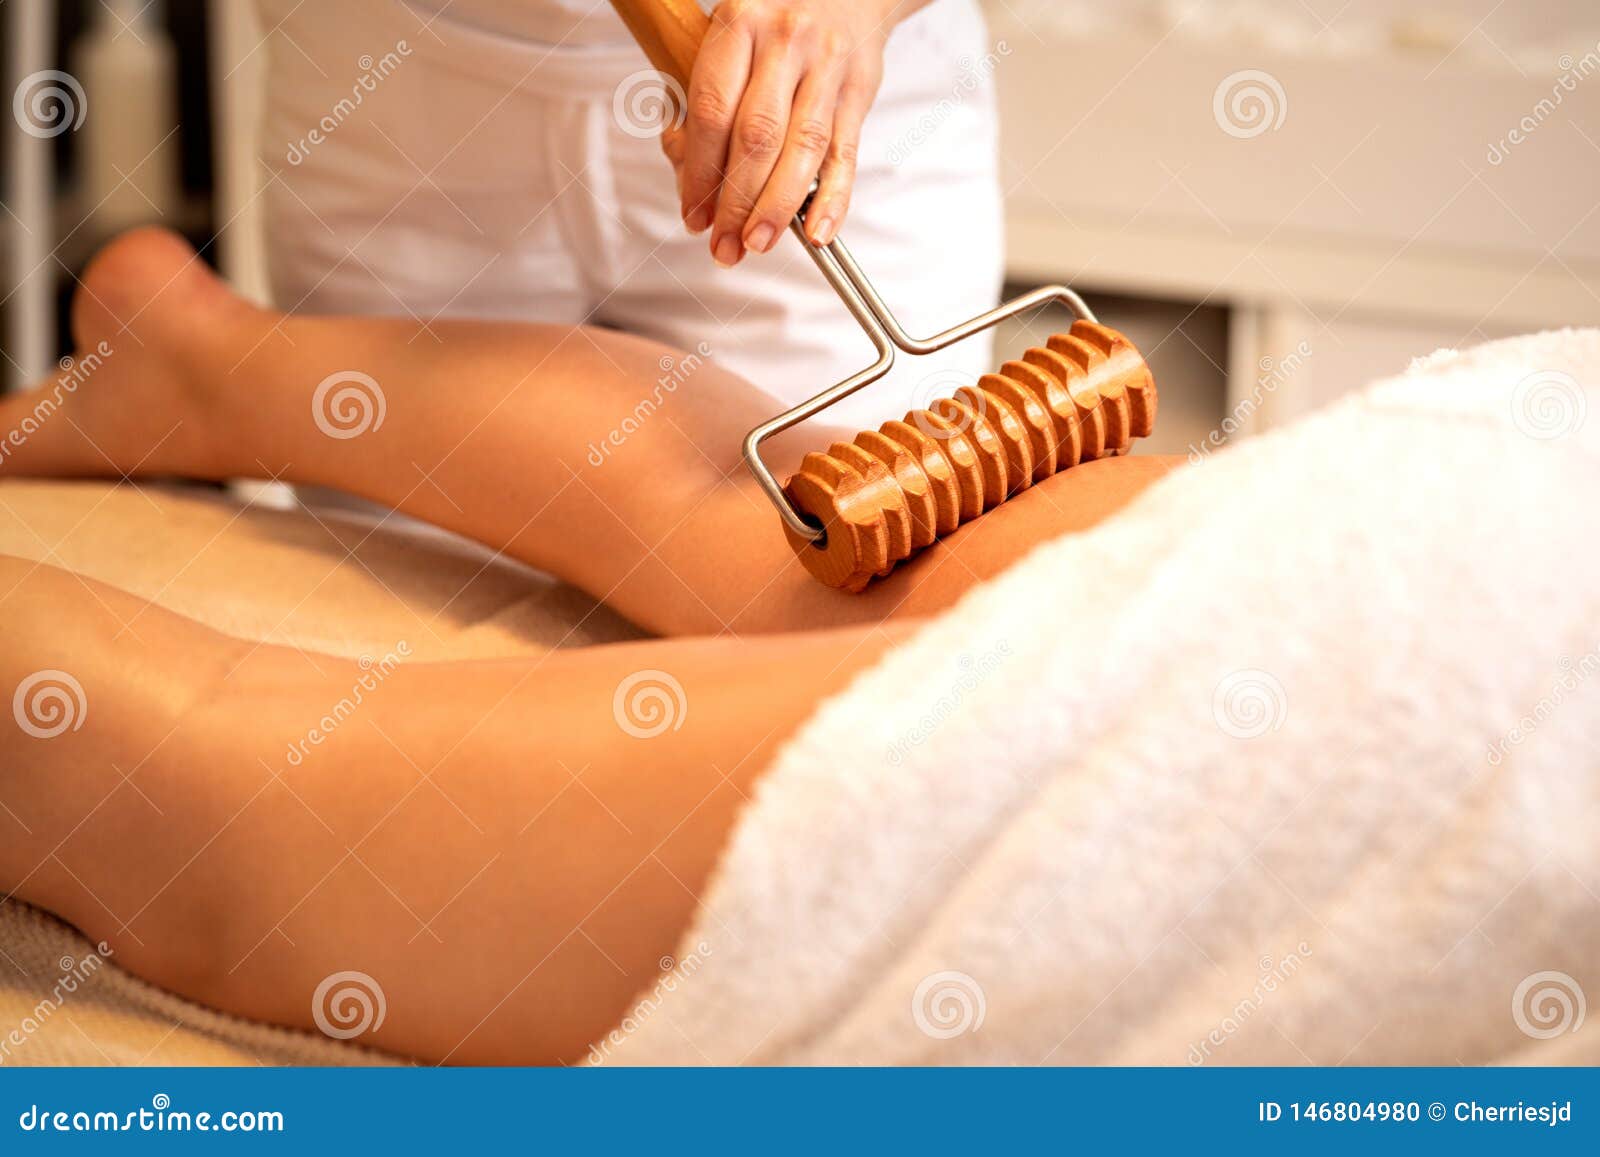 Legs Massage With Rolling Pin In Beauty Spa Salon Stock